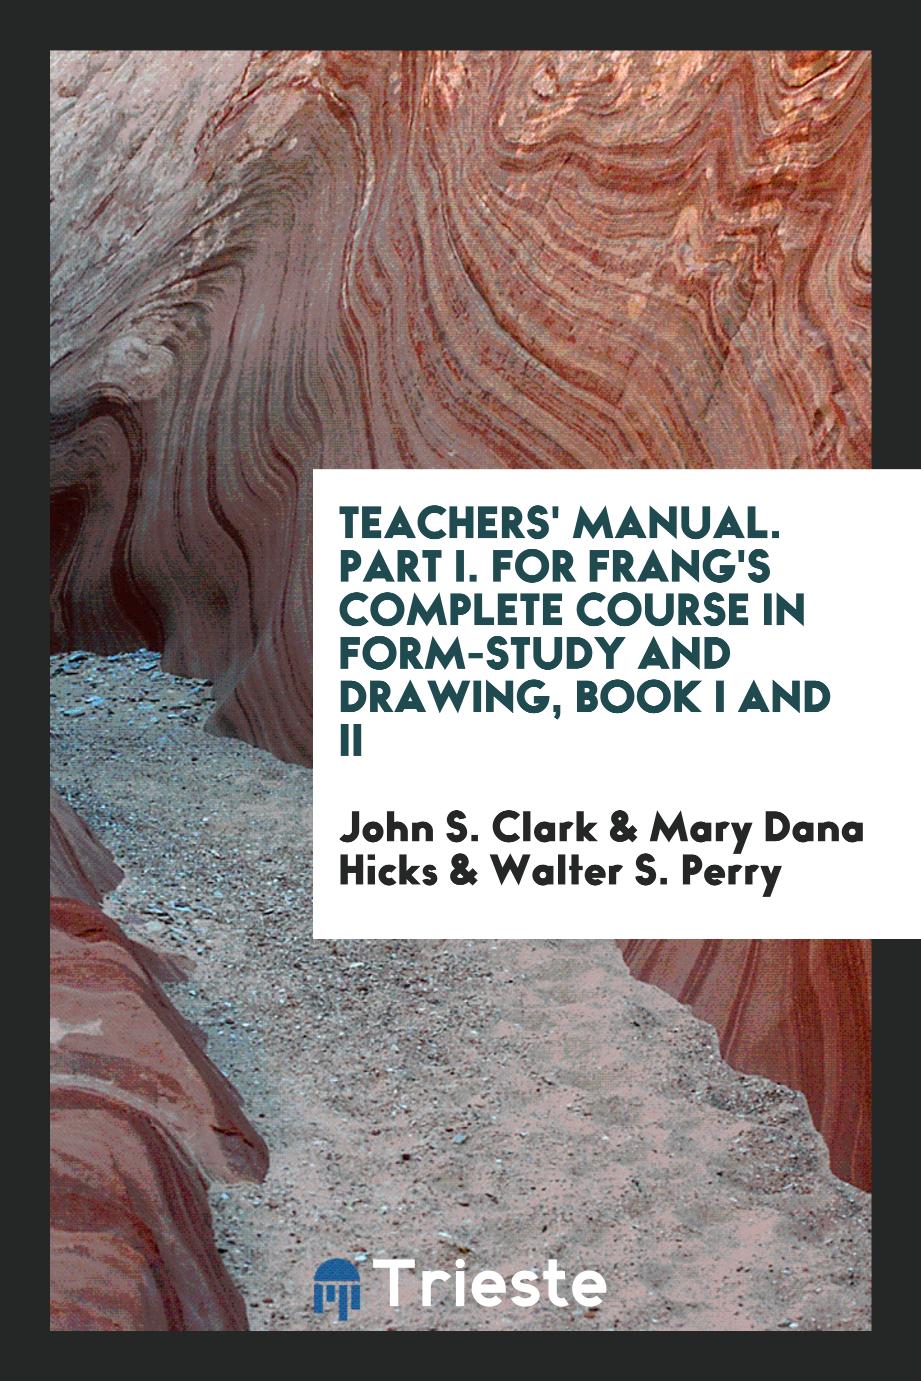 Teachers' Manual. Part I. For Frang's Complete Course in Form-Study and Drawing, Book I and II